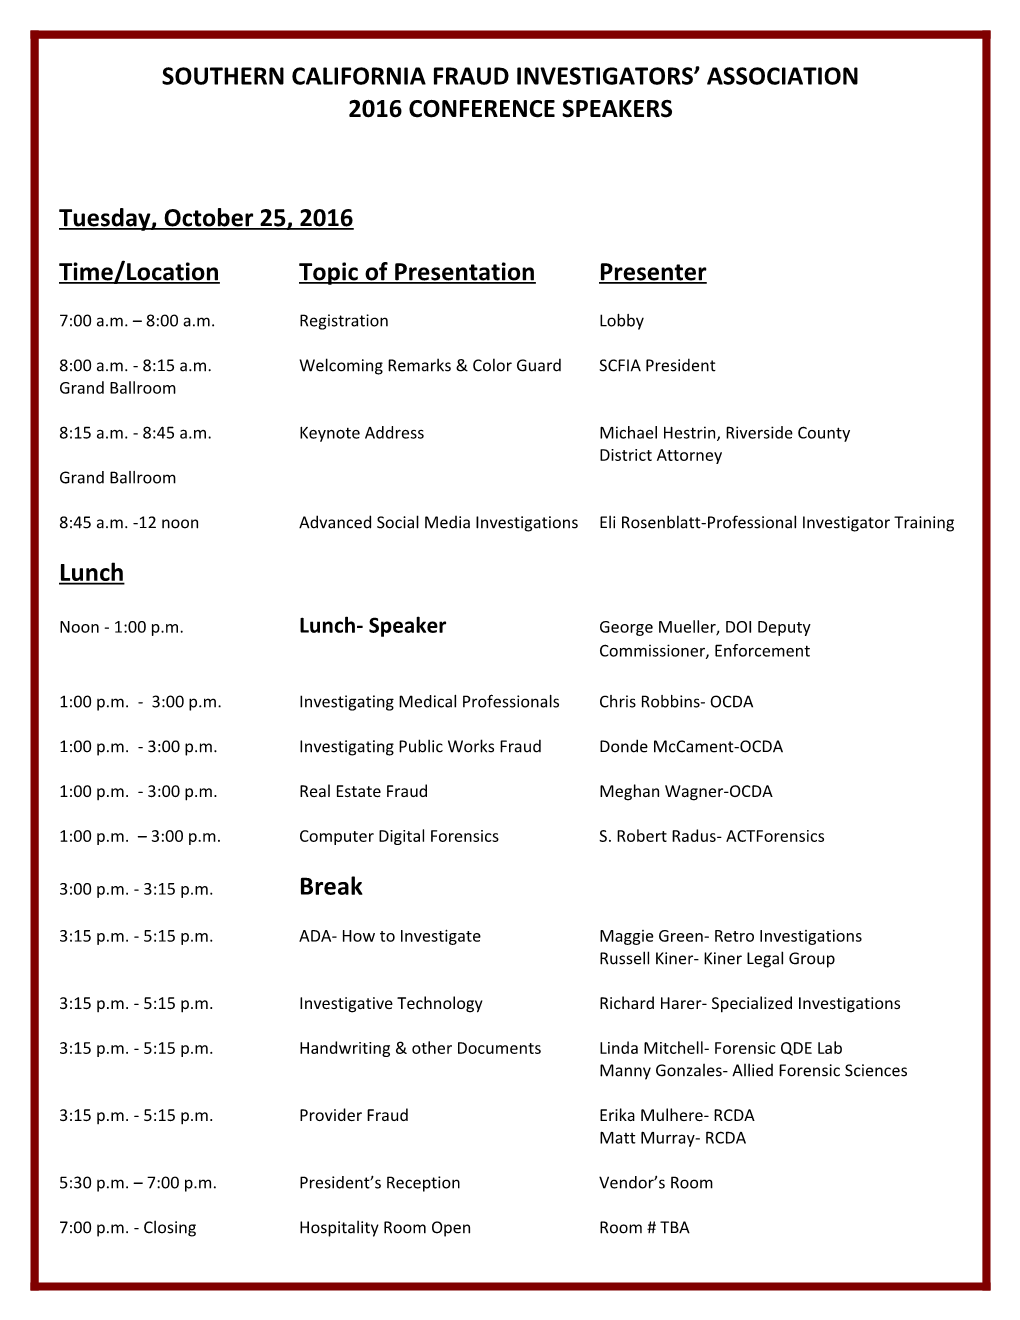 Conference Schedule with Rooms (1412683)